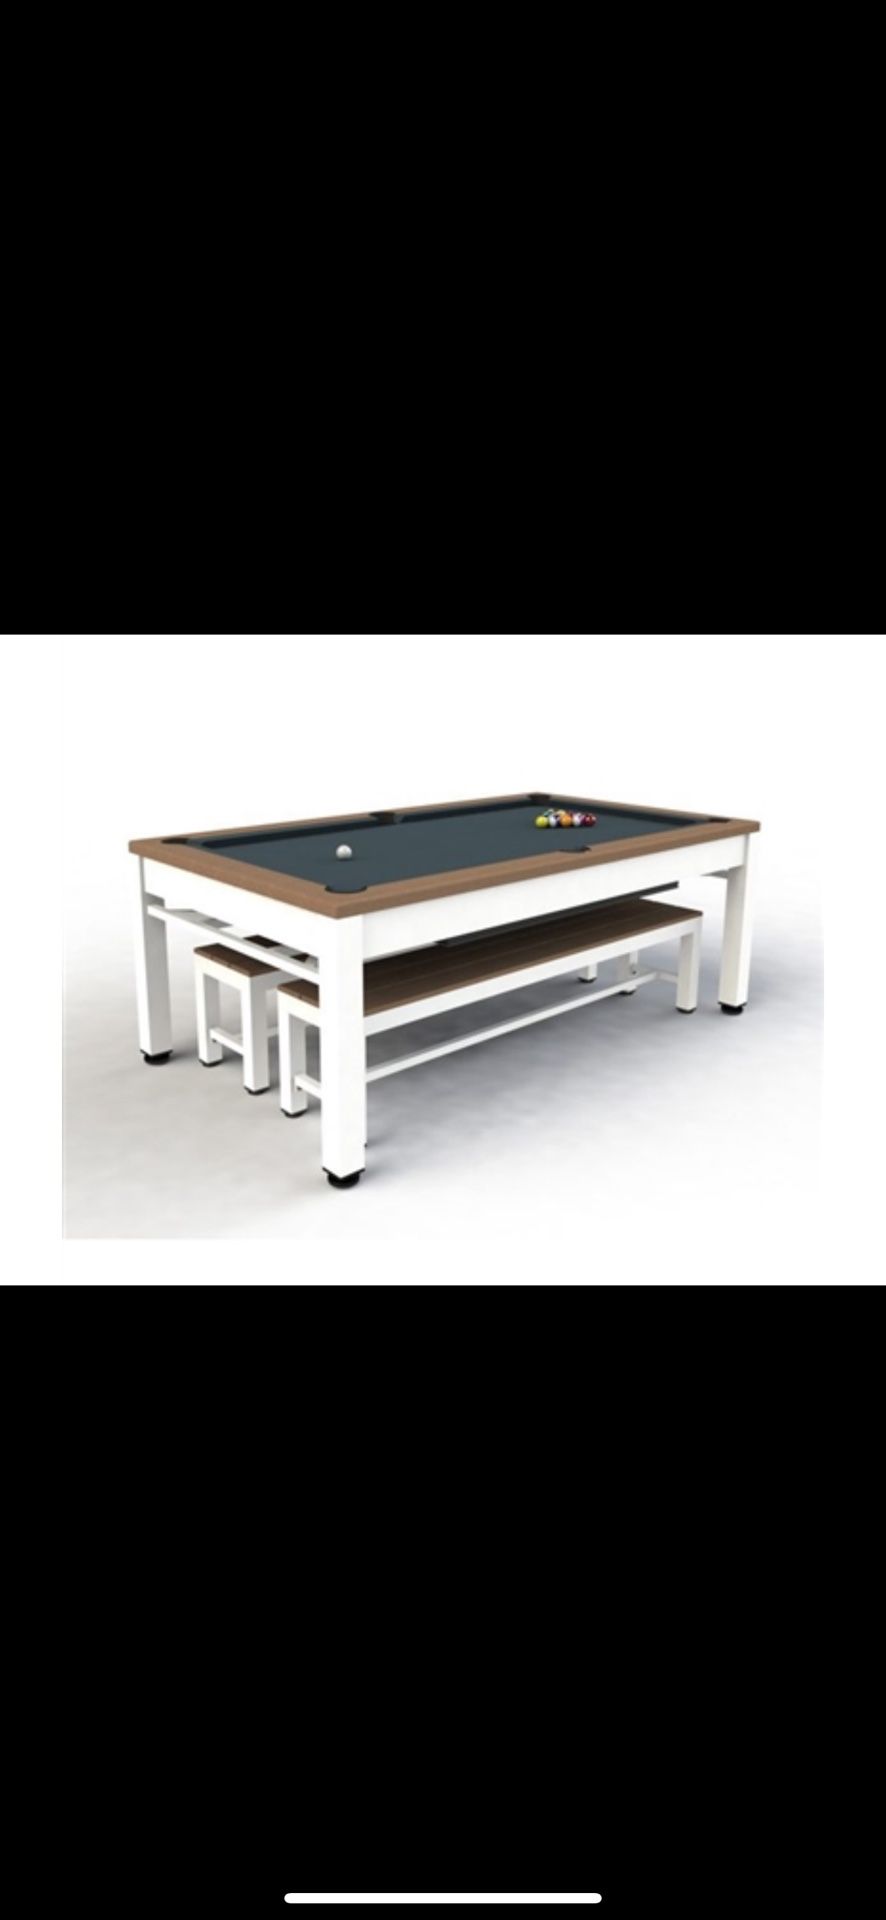 SUPER SALE!! OUTDOOR POOL TABLE! MUST GO 50% OFF!! 